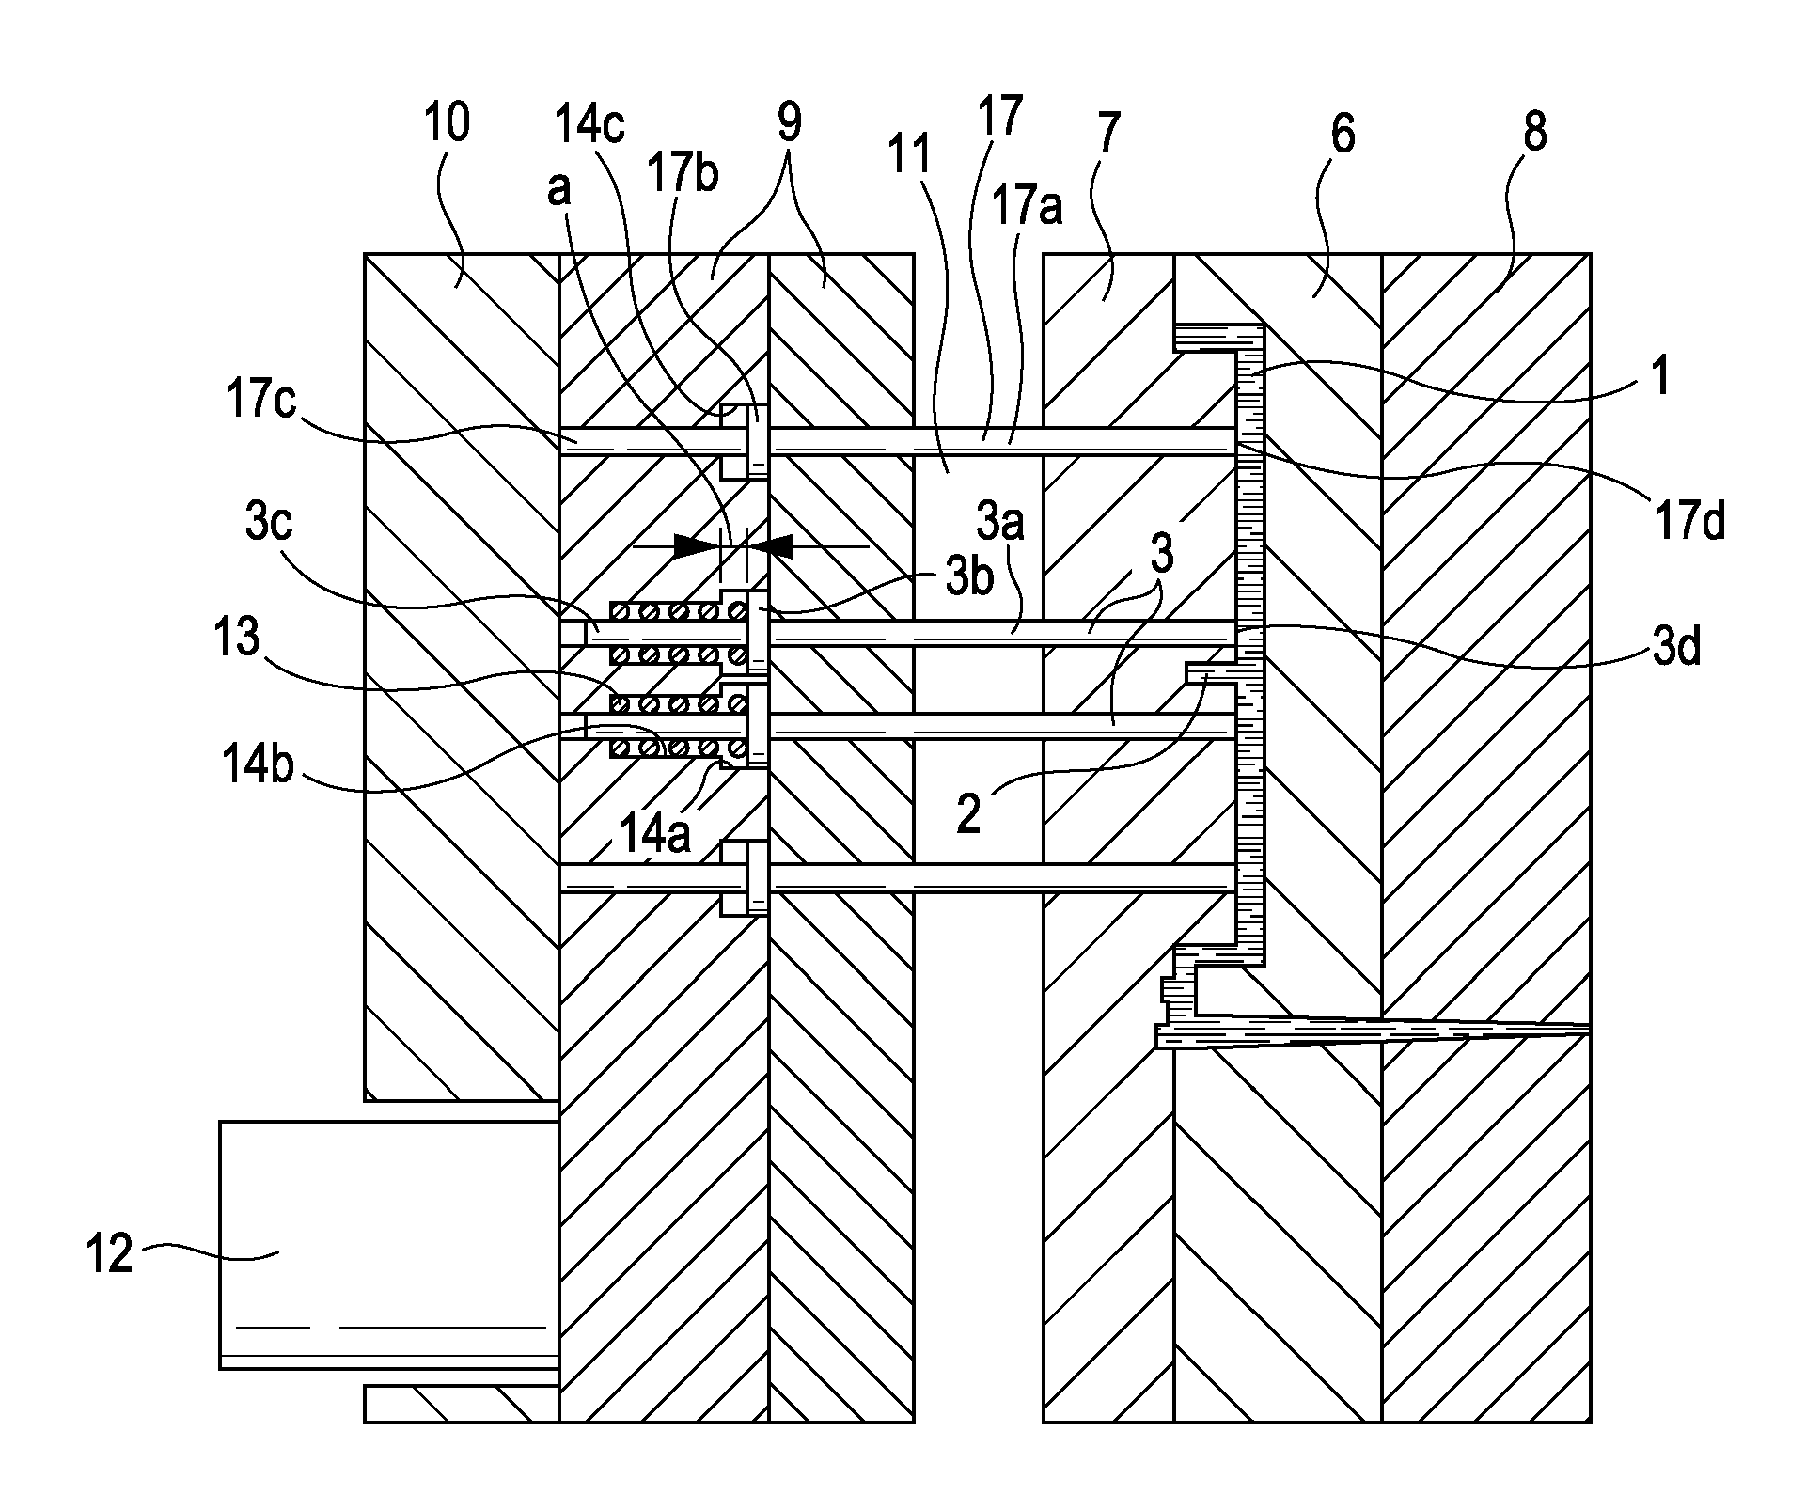 Injection mold and partial compression molding method